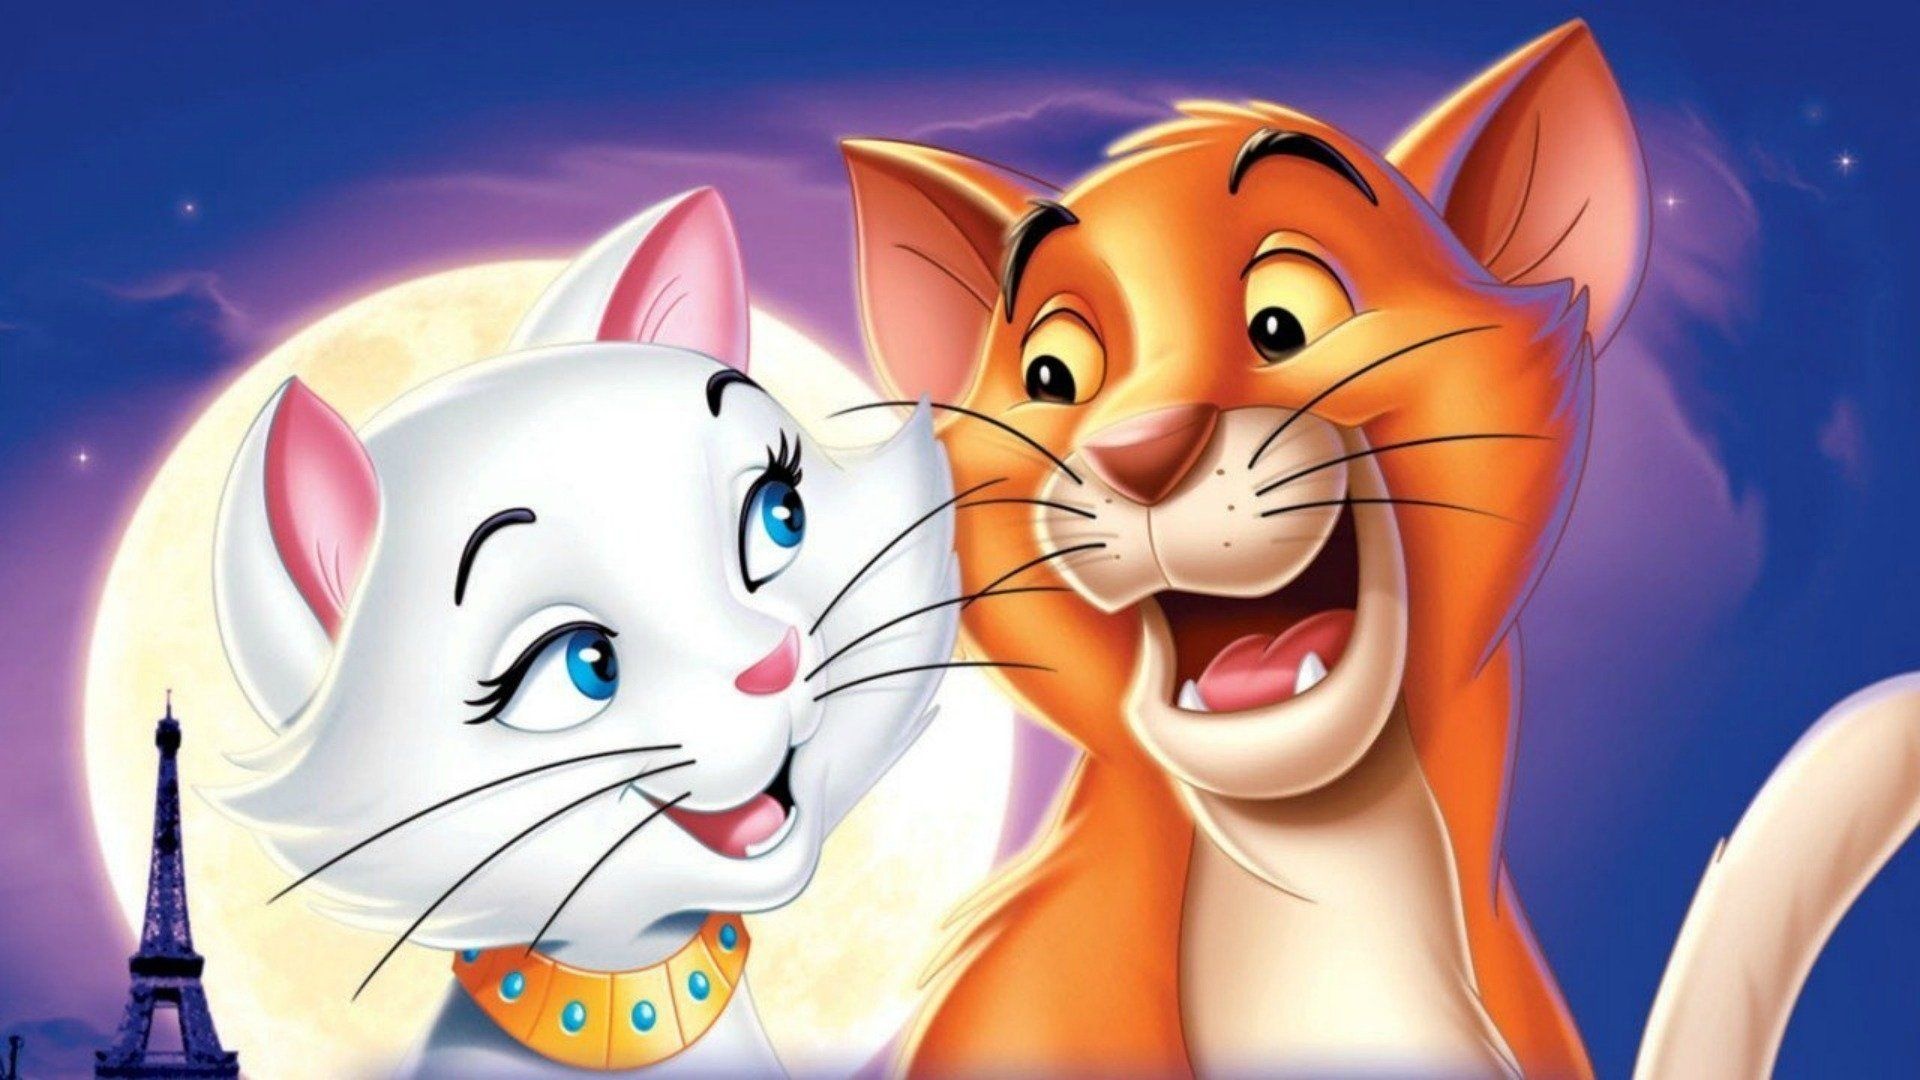 The Aristocats Wallpapers - Top Free The Aristocats Backgrounds 1920x1080